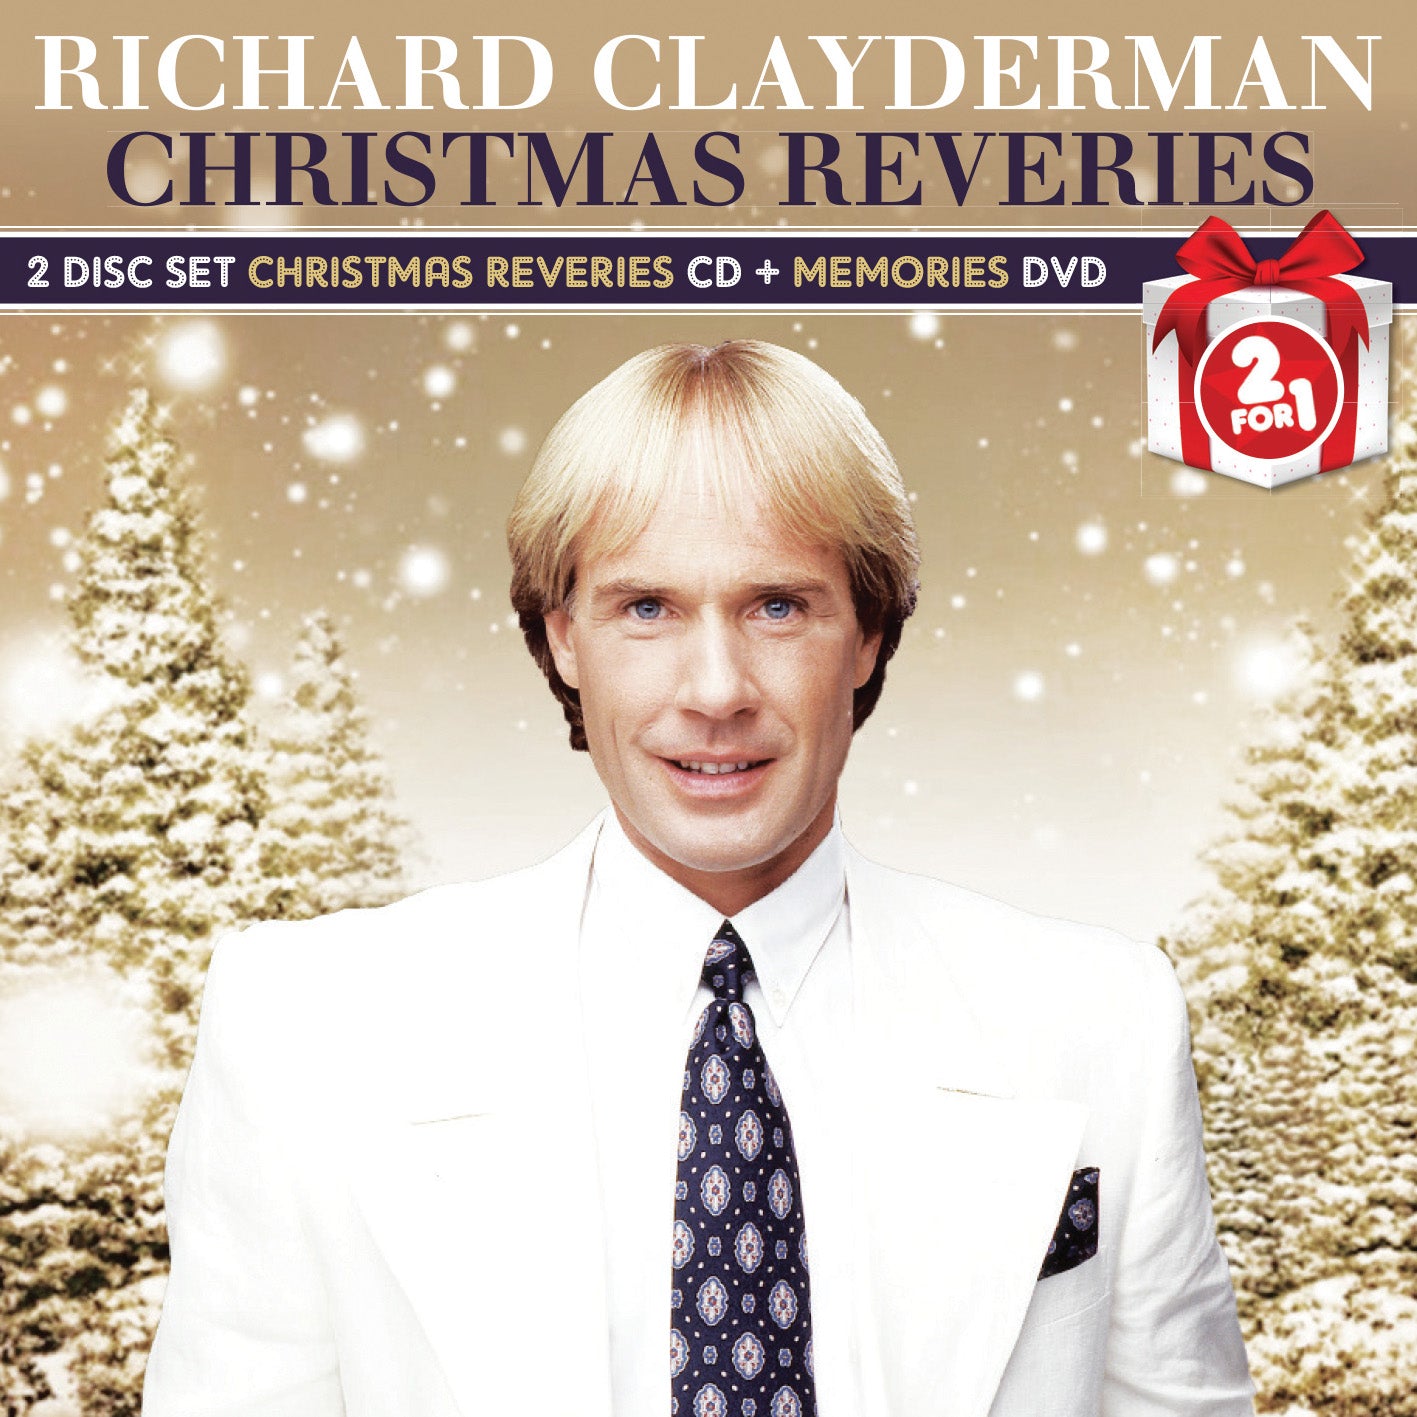 RICHARD CLAYDERMAN - CHRISTMAS REVERIES (COLLECTOR'S EDITION)